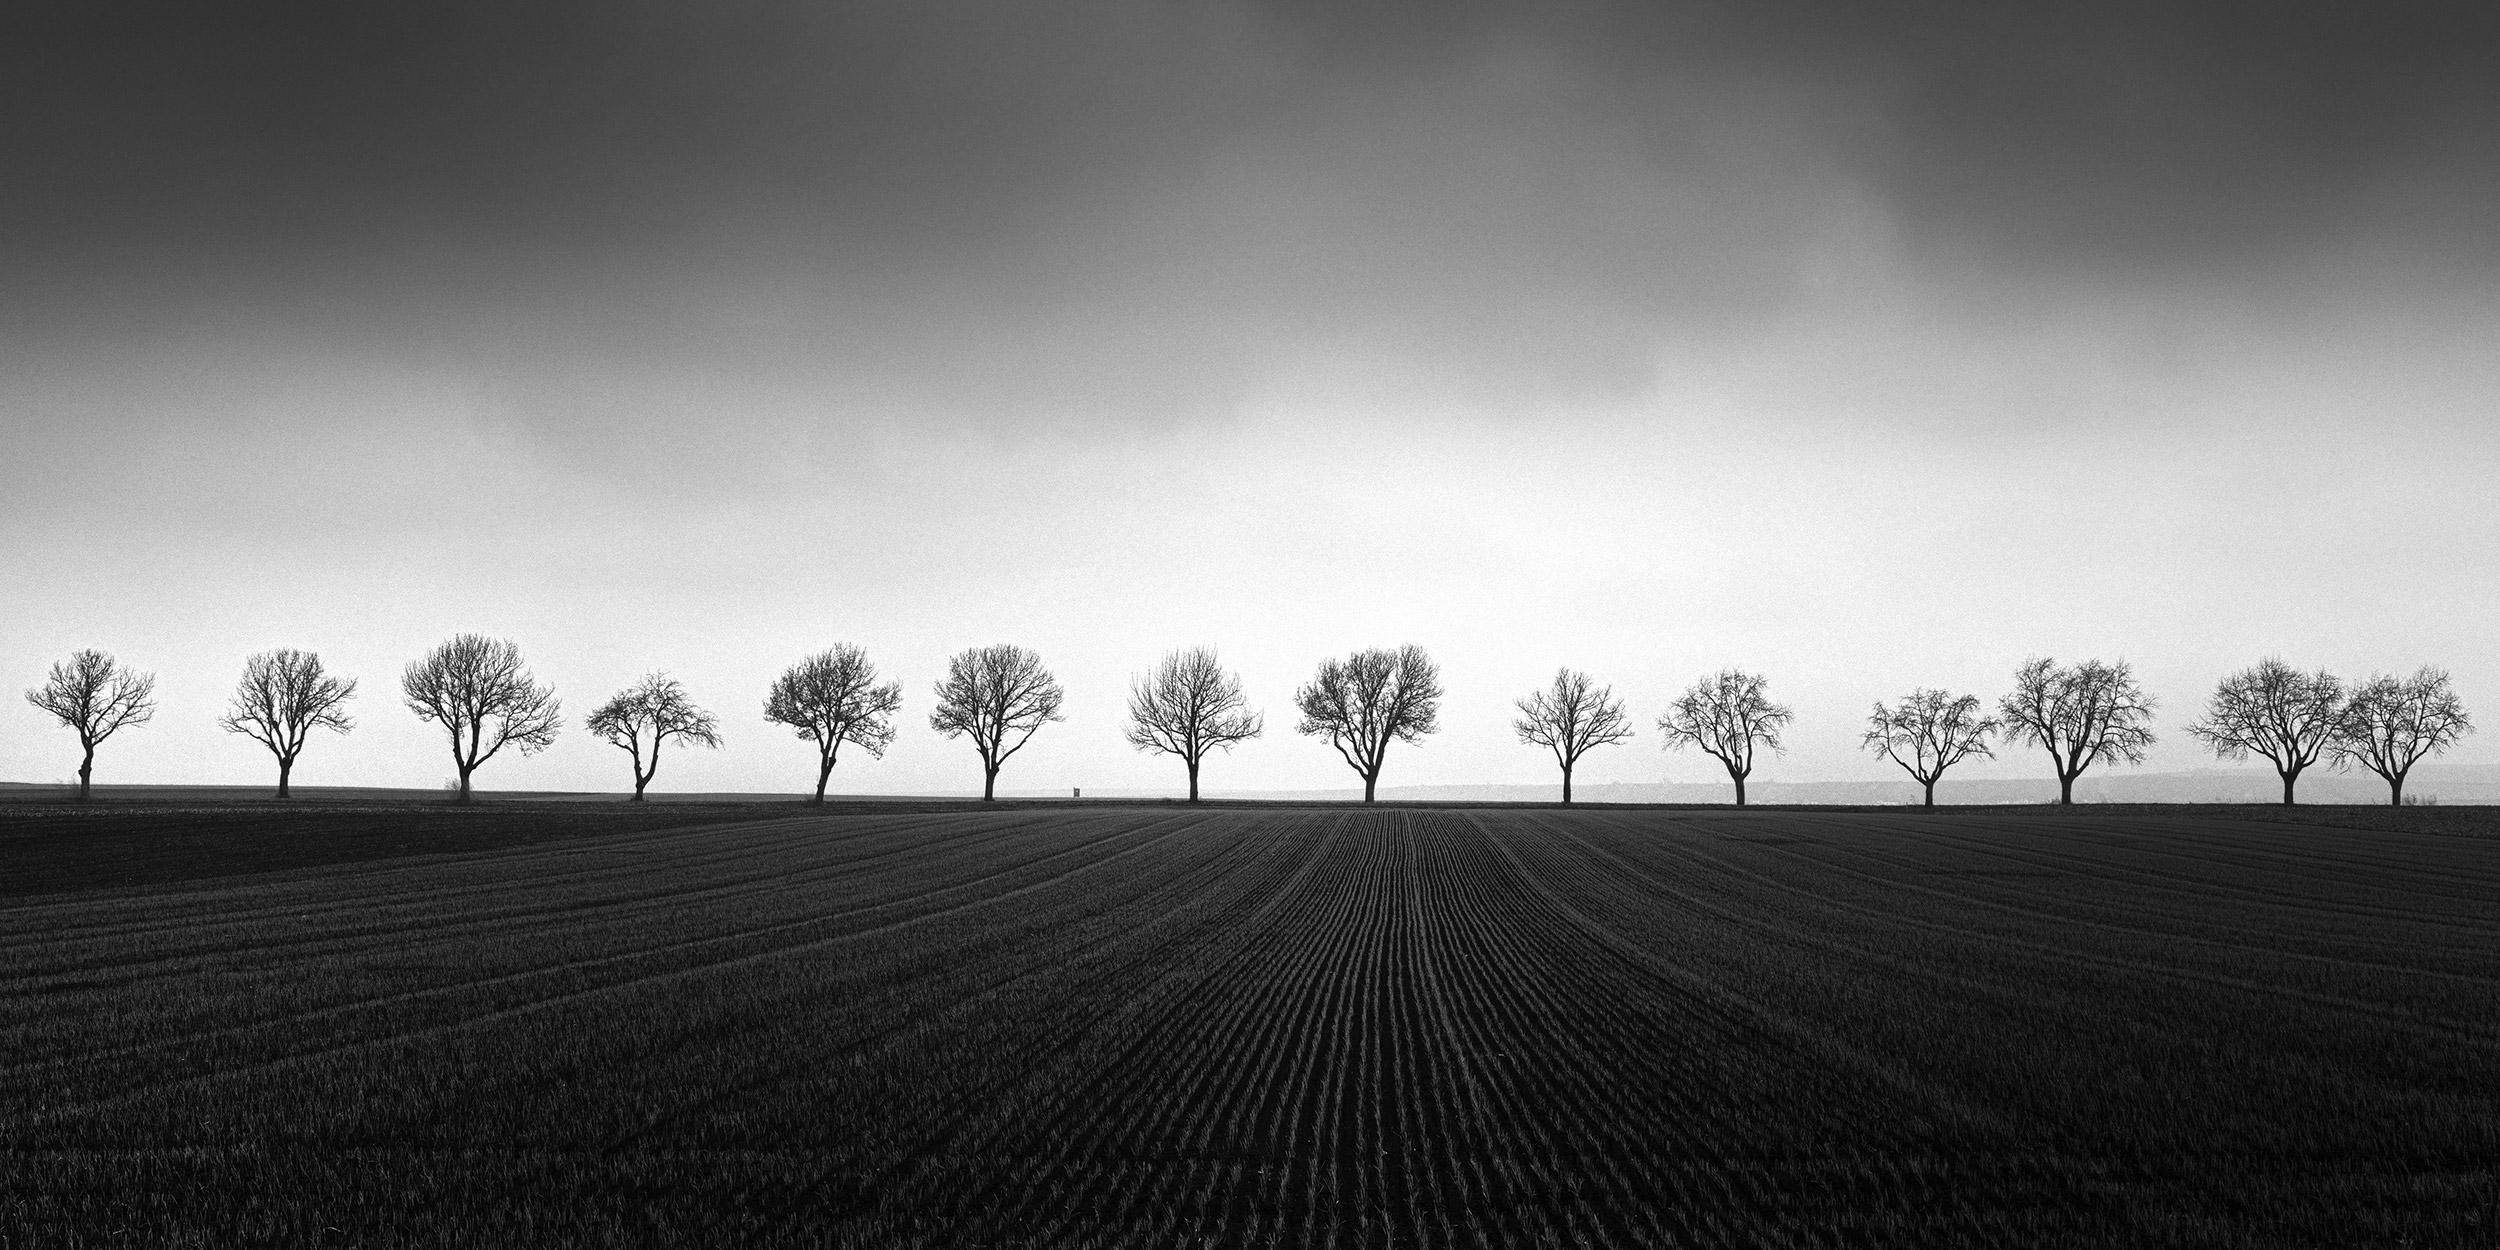 Gerald Berghammer Black and White Photograph - Fourteen Cherry Trees, Cornfield, black and white photography, art, landscape